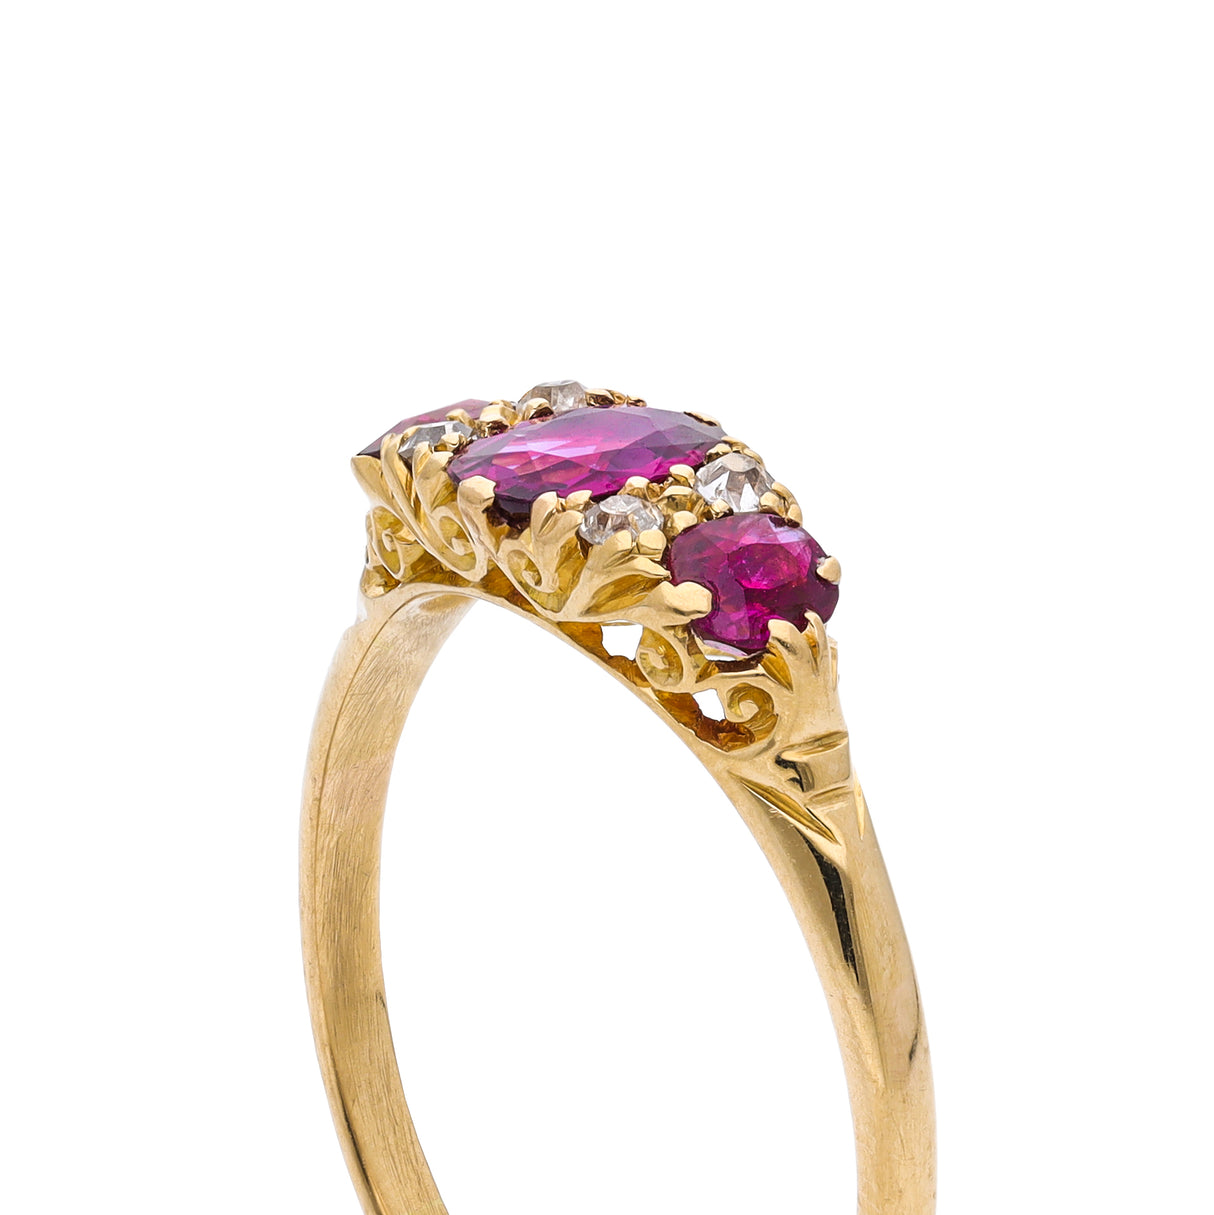 Antique Edwardian three stone ruby and diamond ring, side view. 